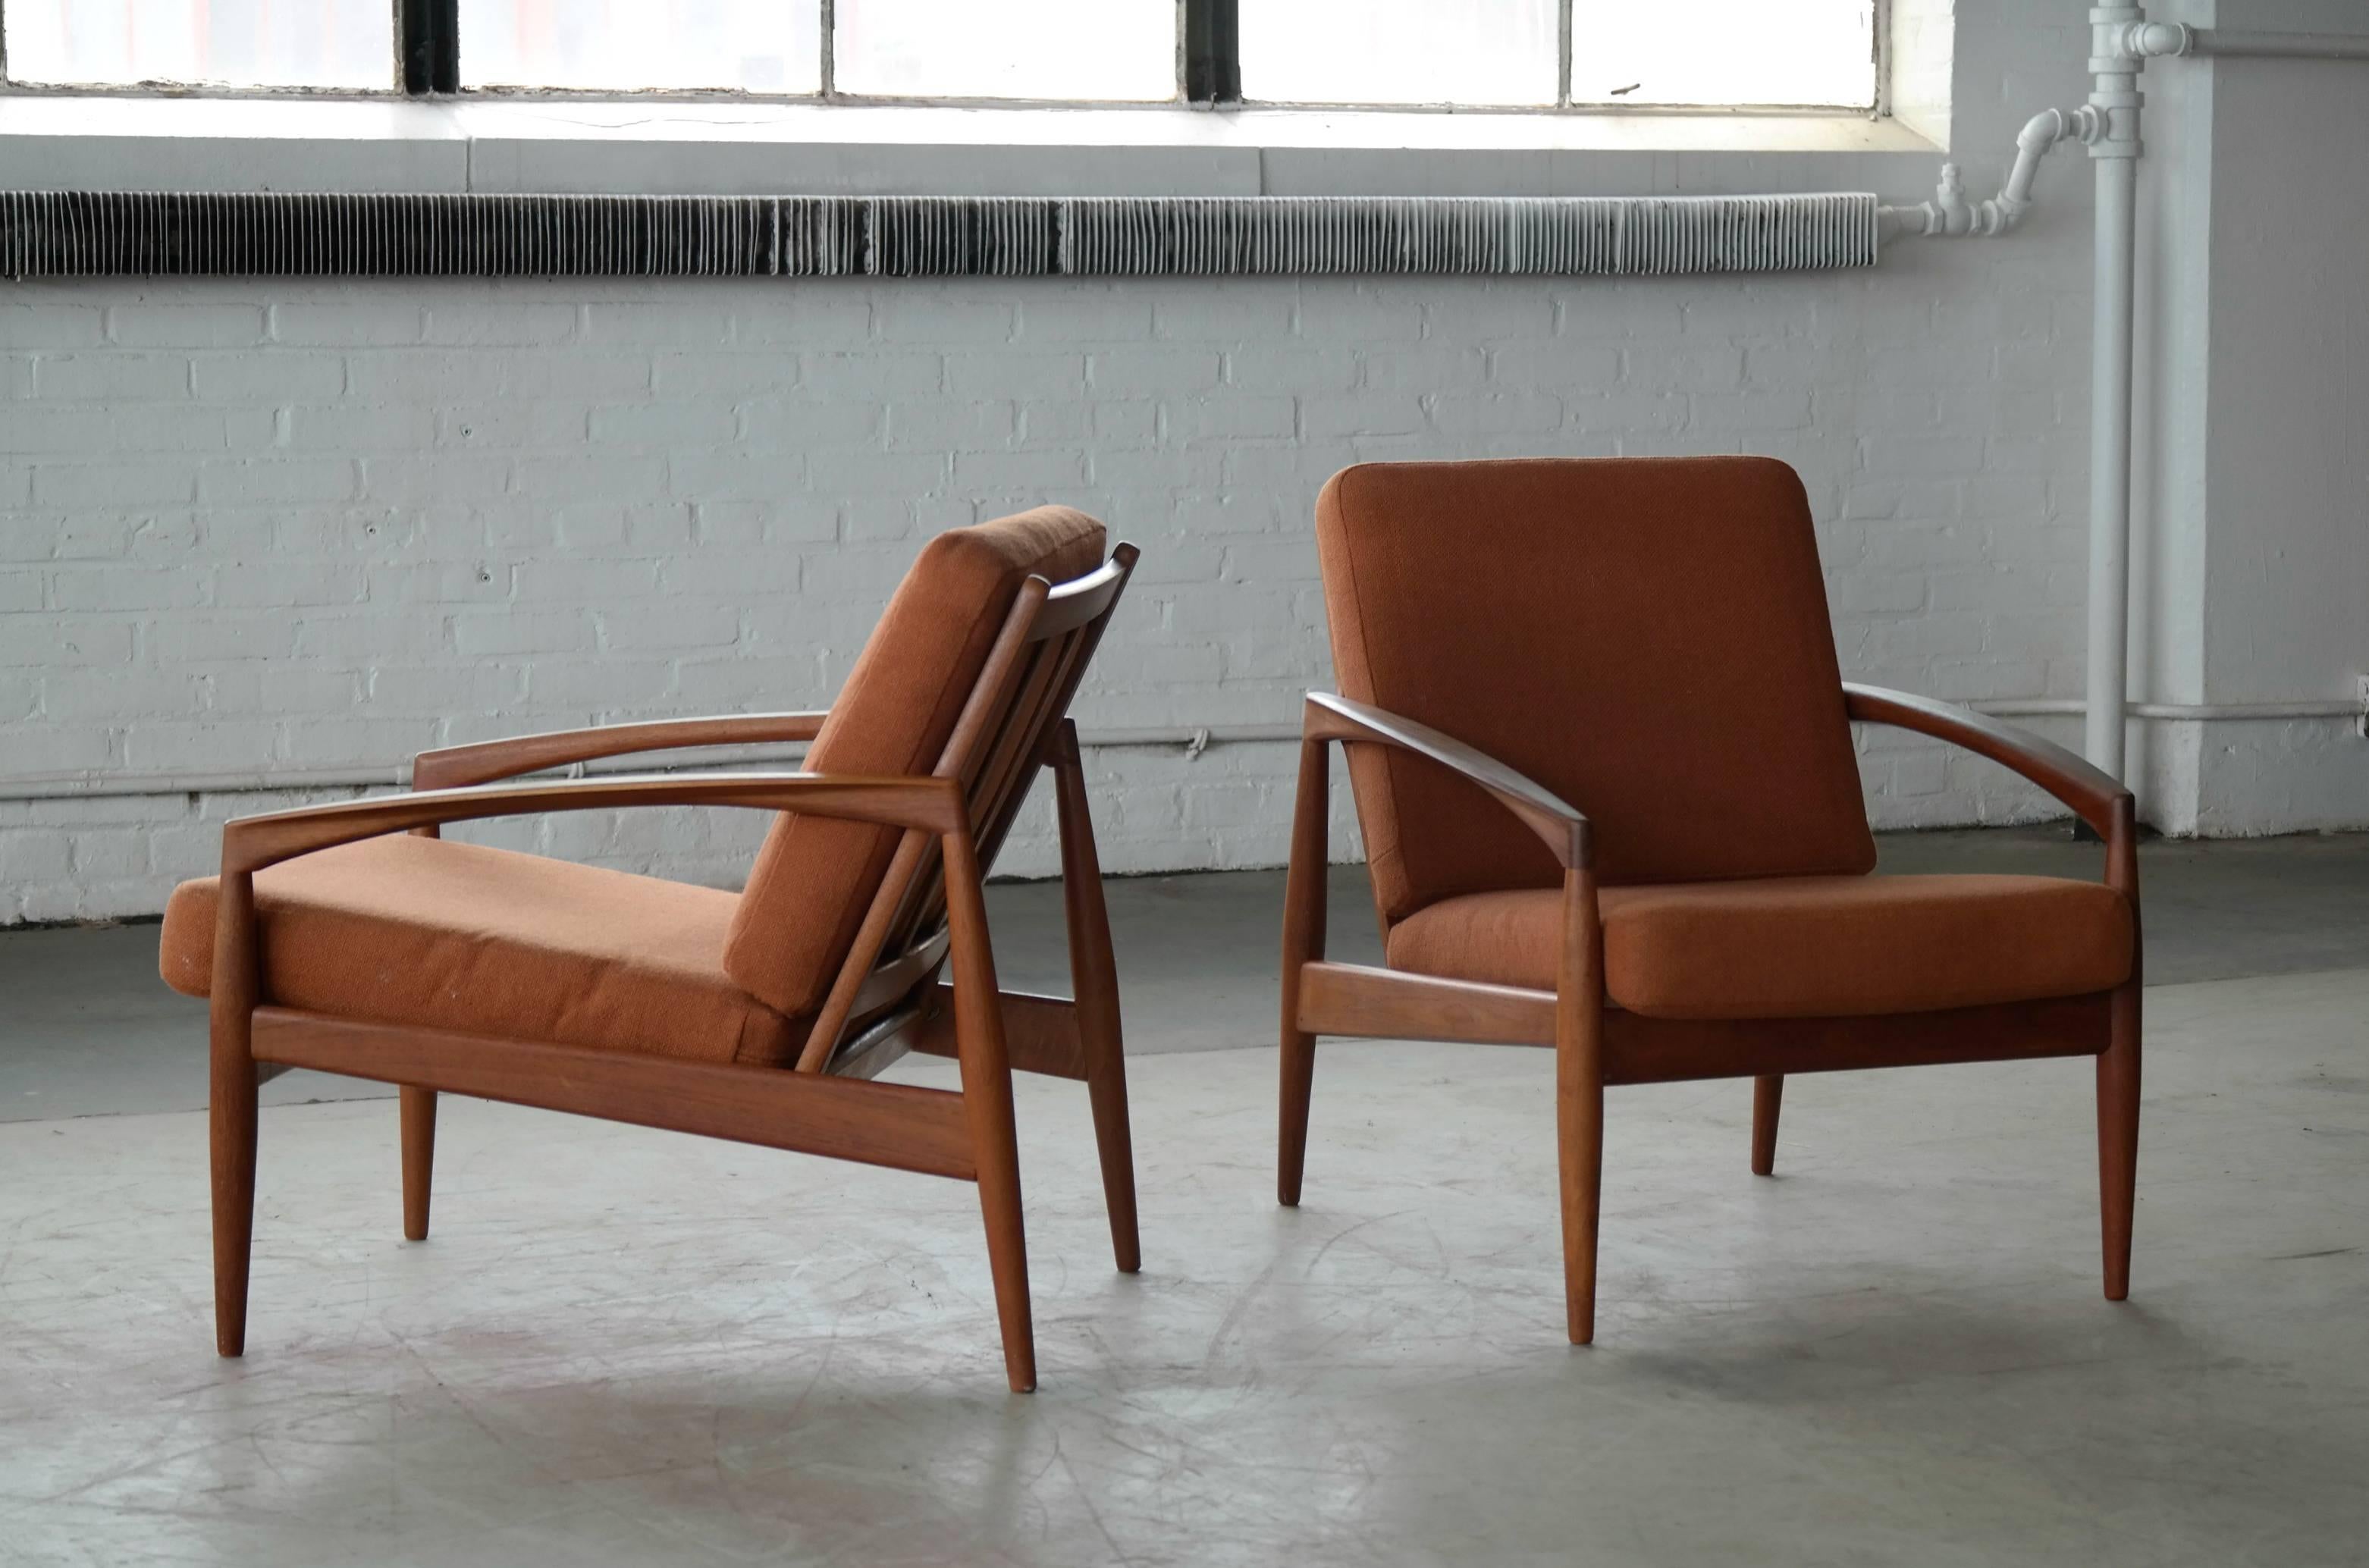 Beautiful pair of Model 121 known as the Paper Knife teak easy chairs by Kai Kristiansen manufactured by Magnus Olesen, Denmark. Made of solid teak wood and is of superb quality. Great clean lines and amazing details. The chairs still have their